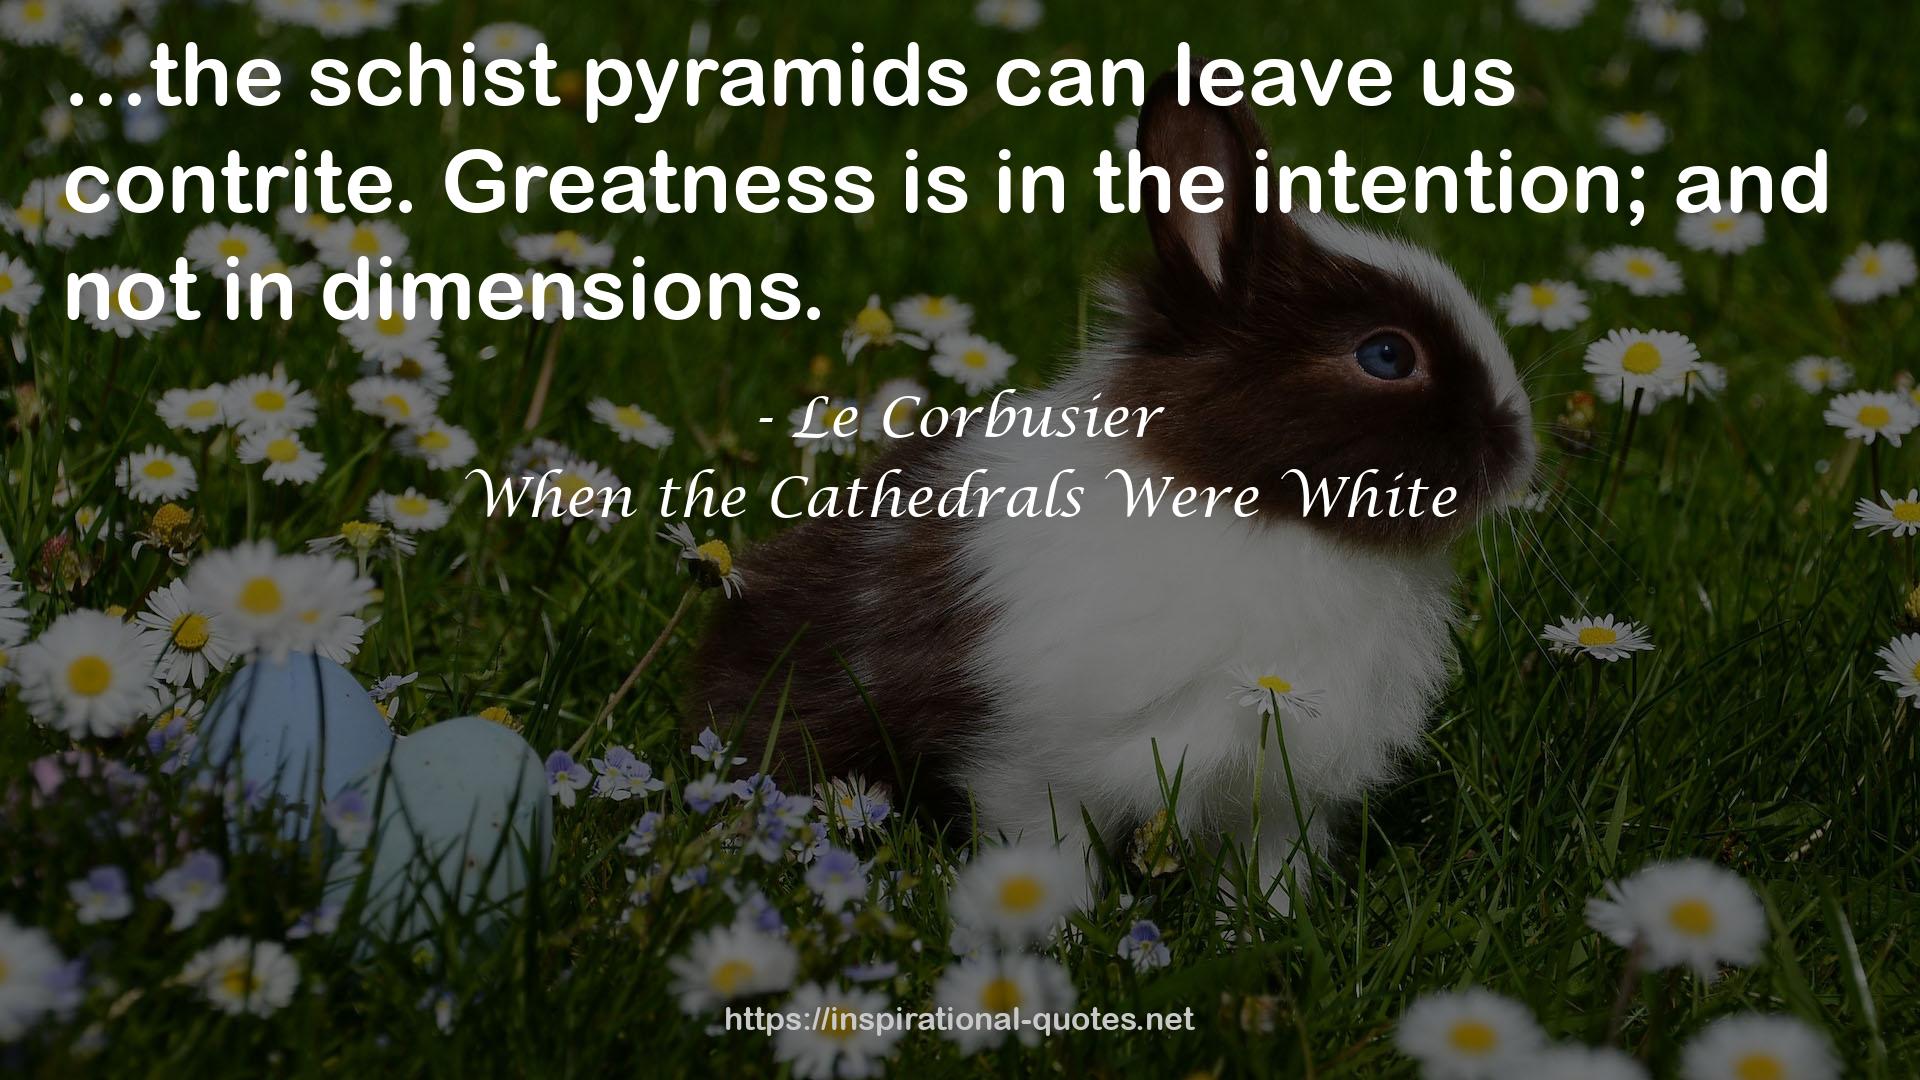 When the Cathedrals Were White QUOTES